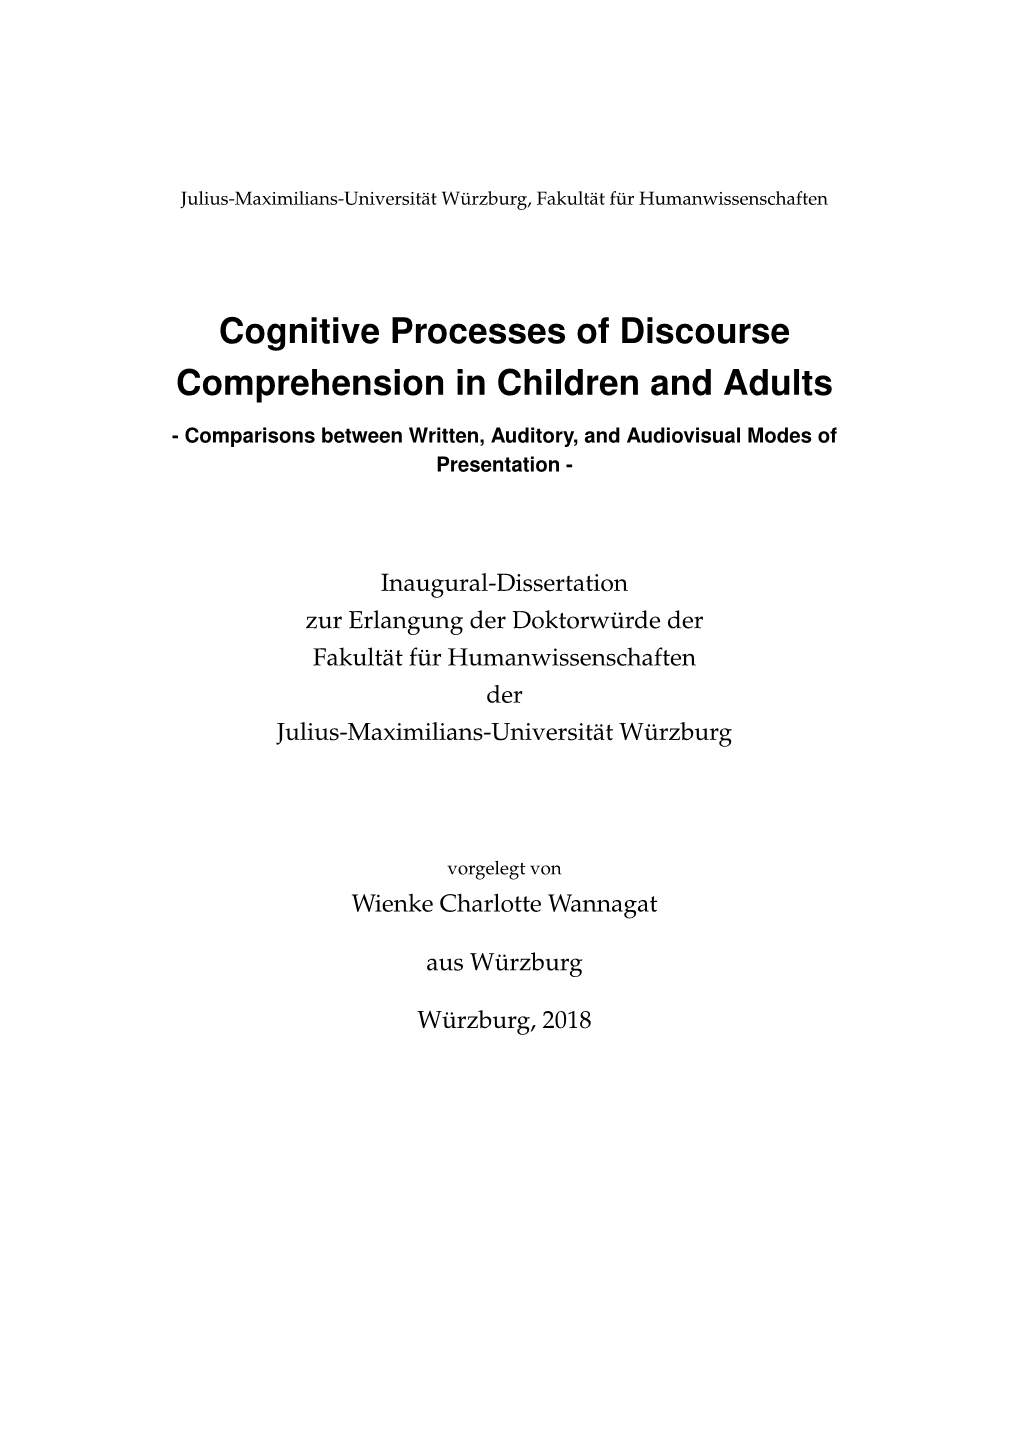 Cognitive Processes of Discourse Comprehension in Children and Adults